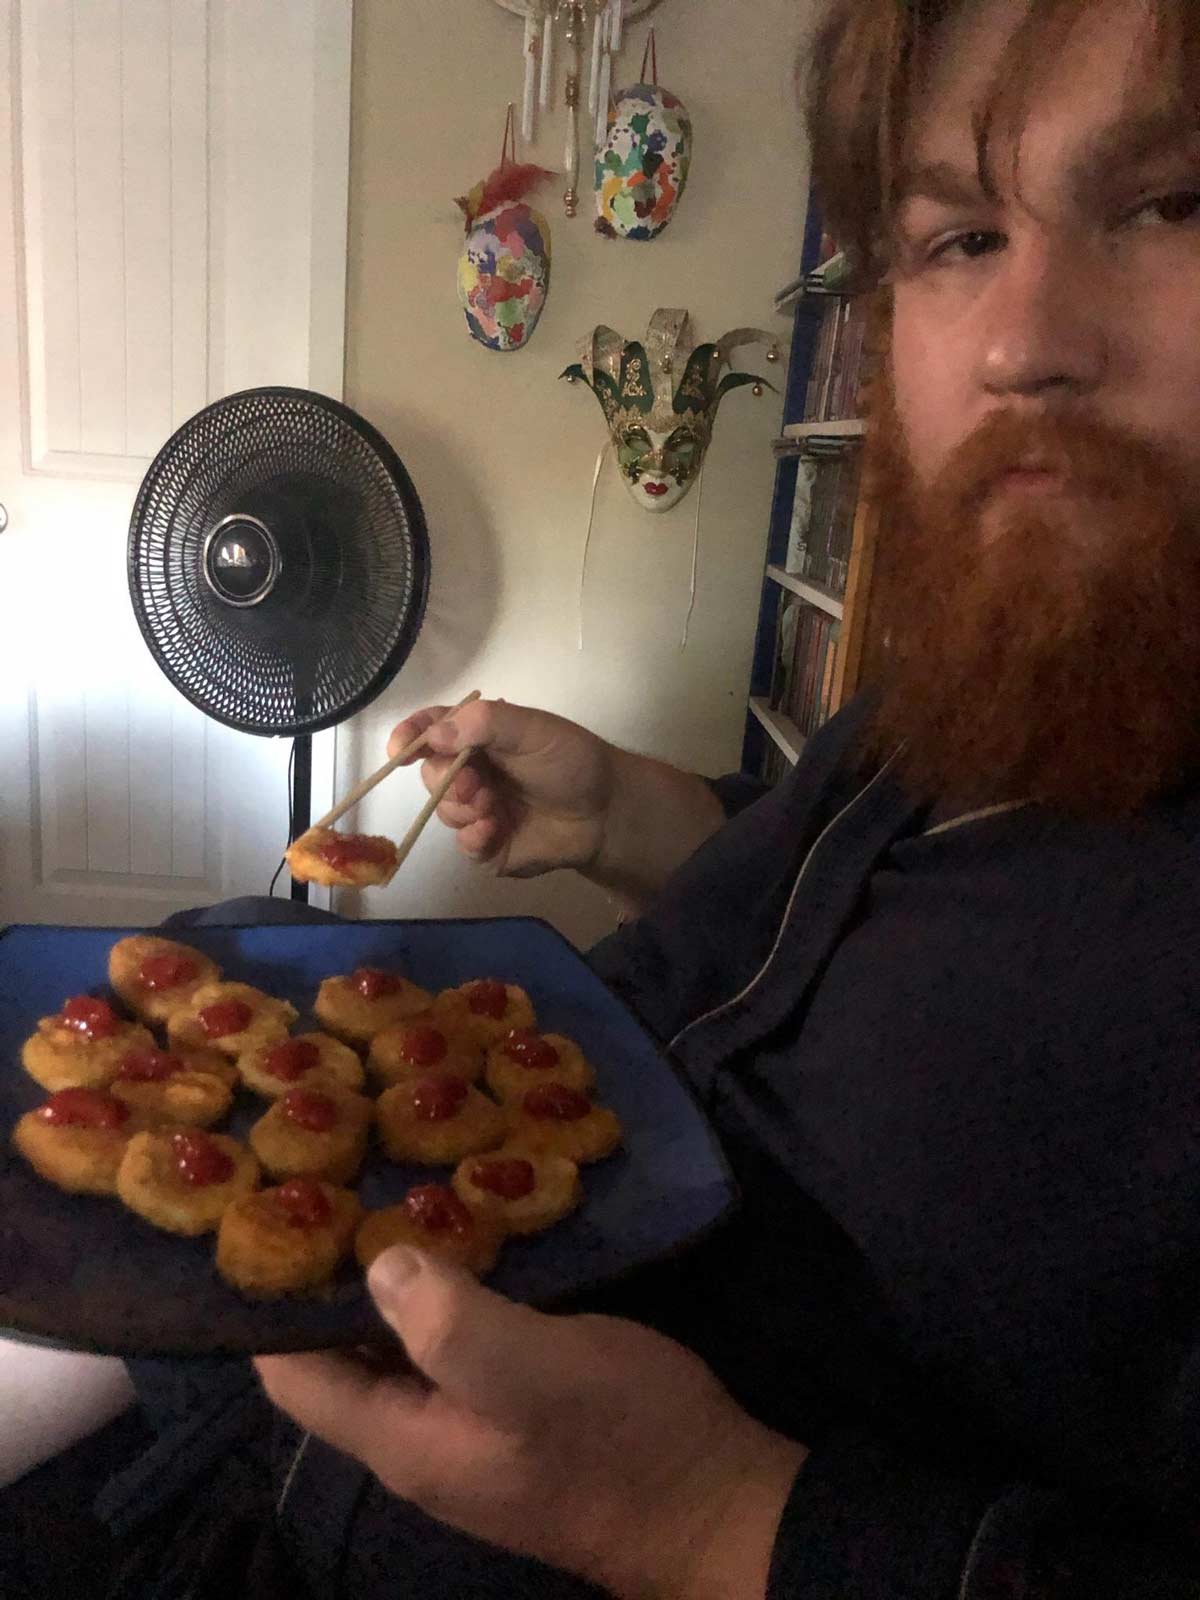 The way my husband eats chicken nuggets